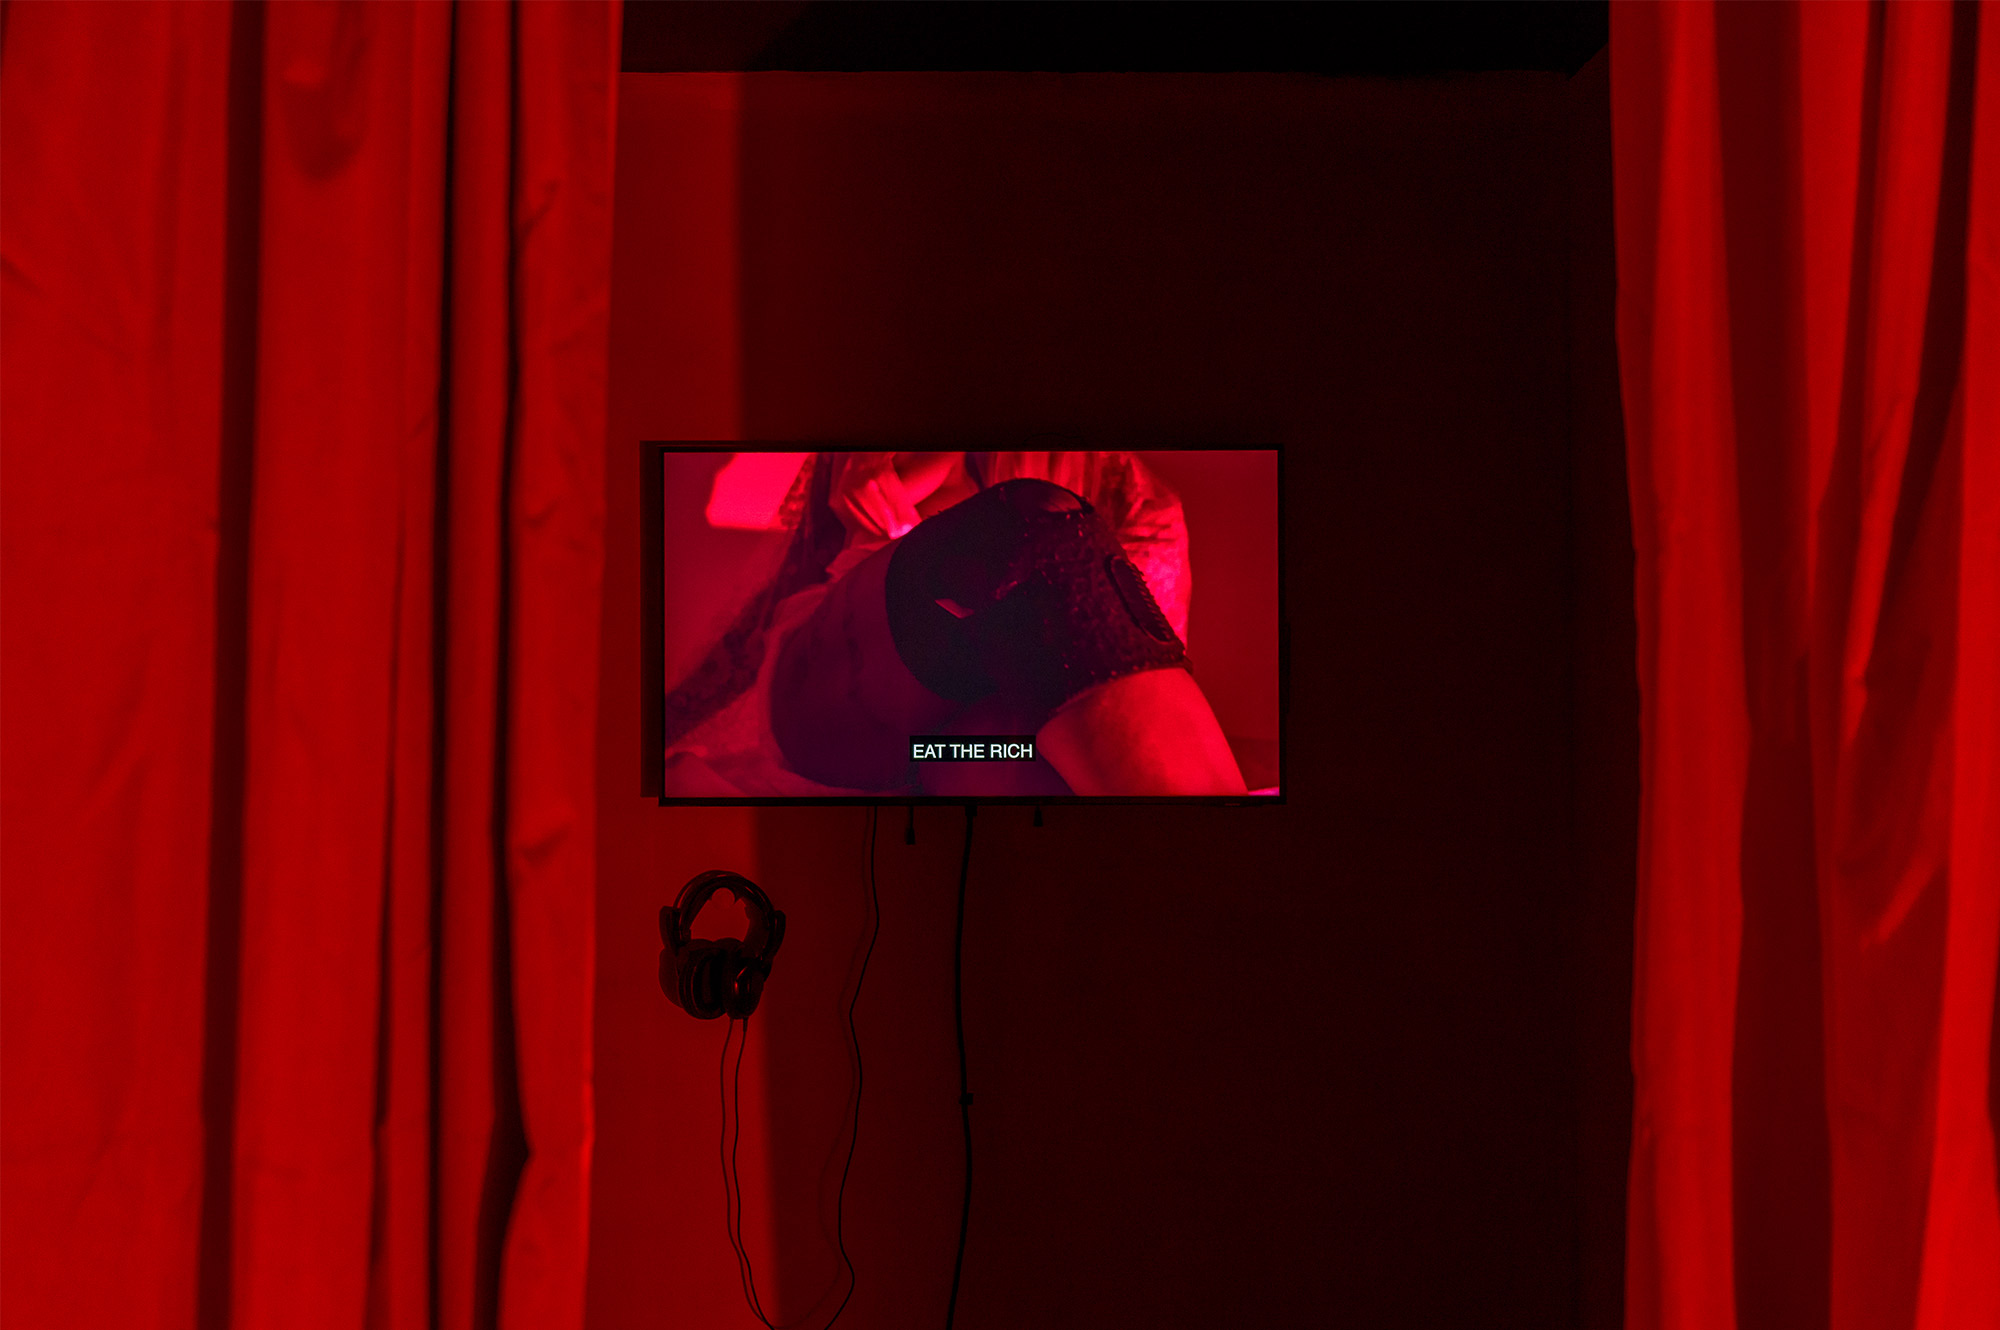 Red curtains surrounding a video installation. A knee is visible, with the text EAT THE RICH